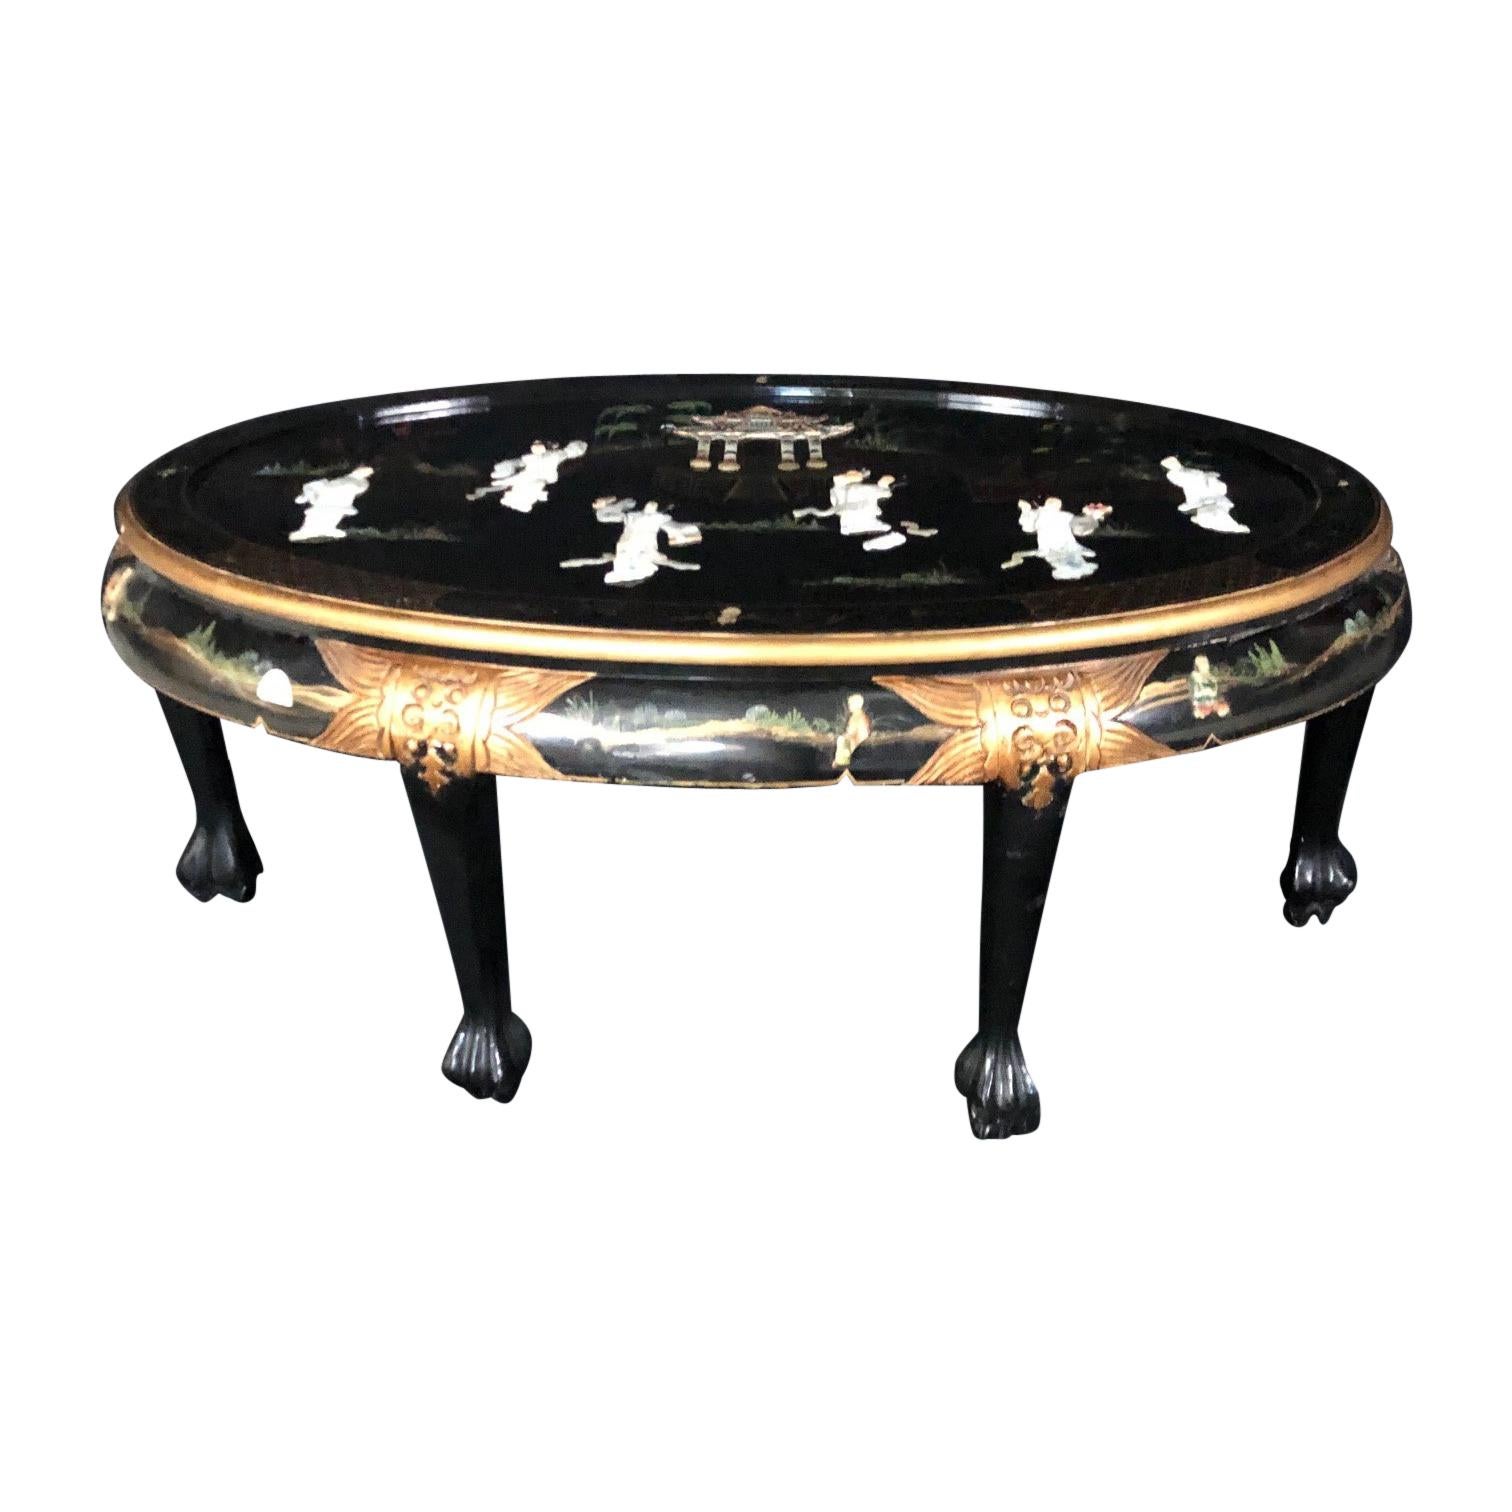 Romantic Chinese Black Ebony Lacquer Wood and Mother of Pearl Coffee Table